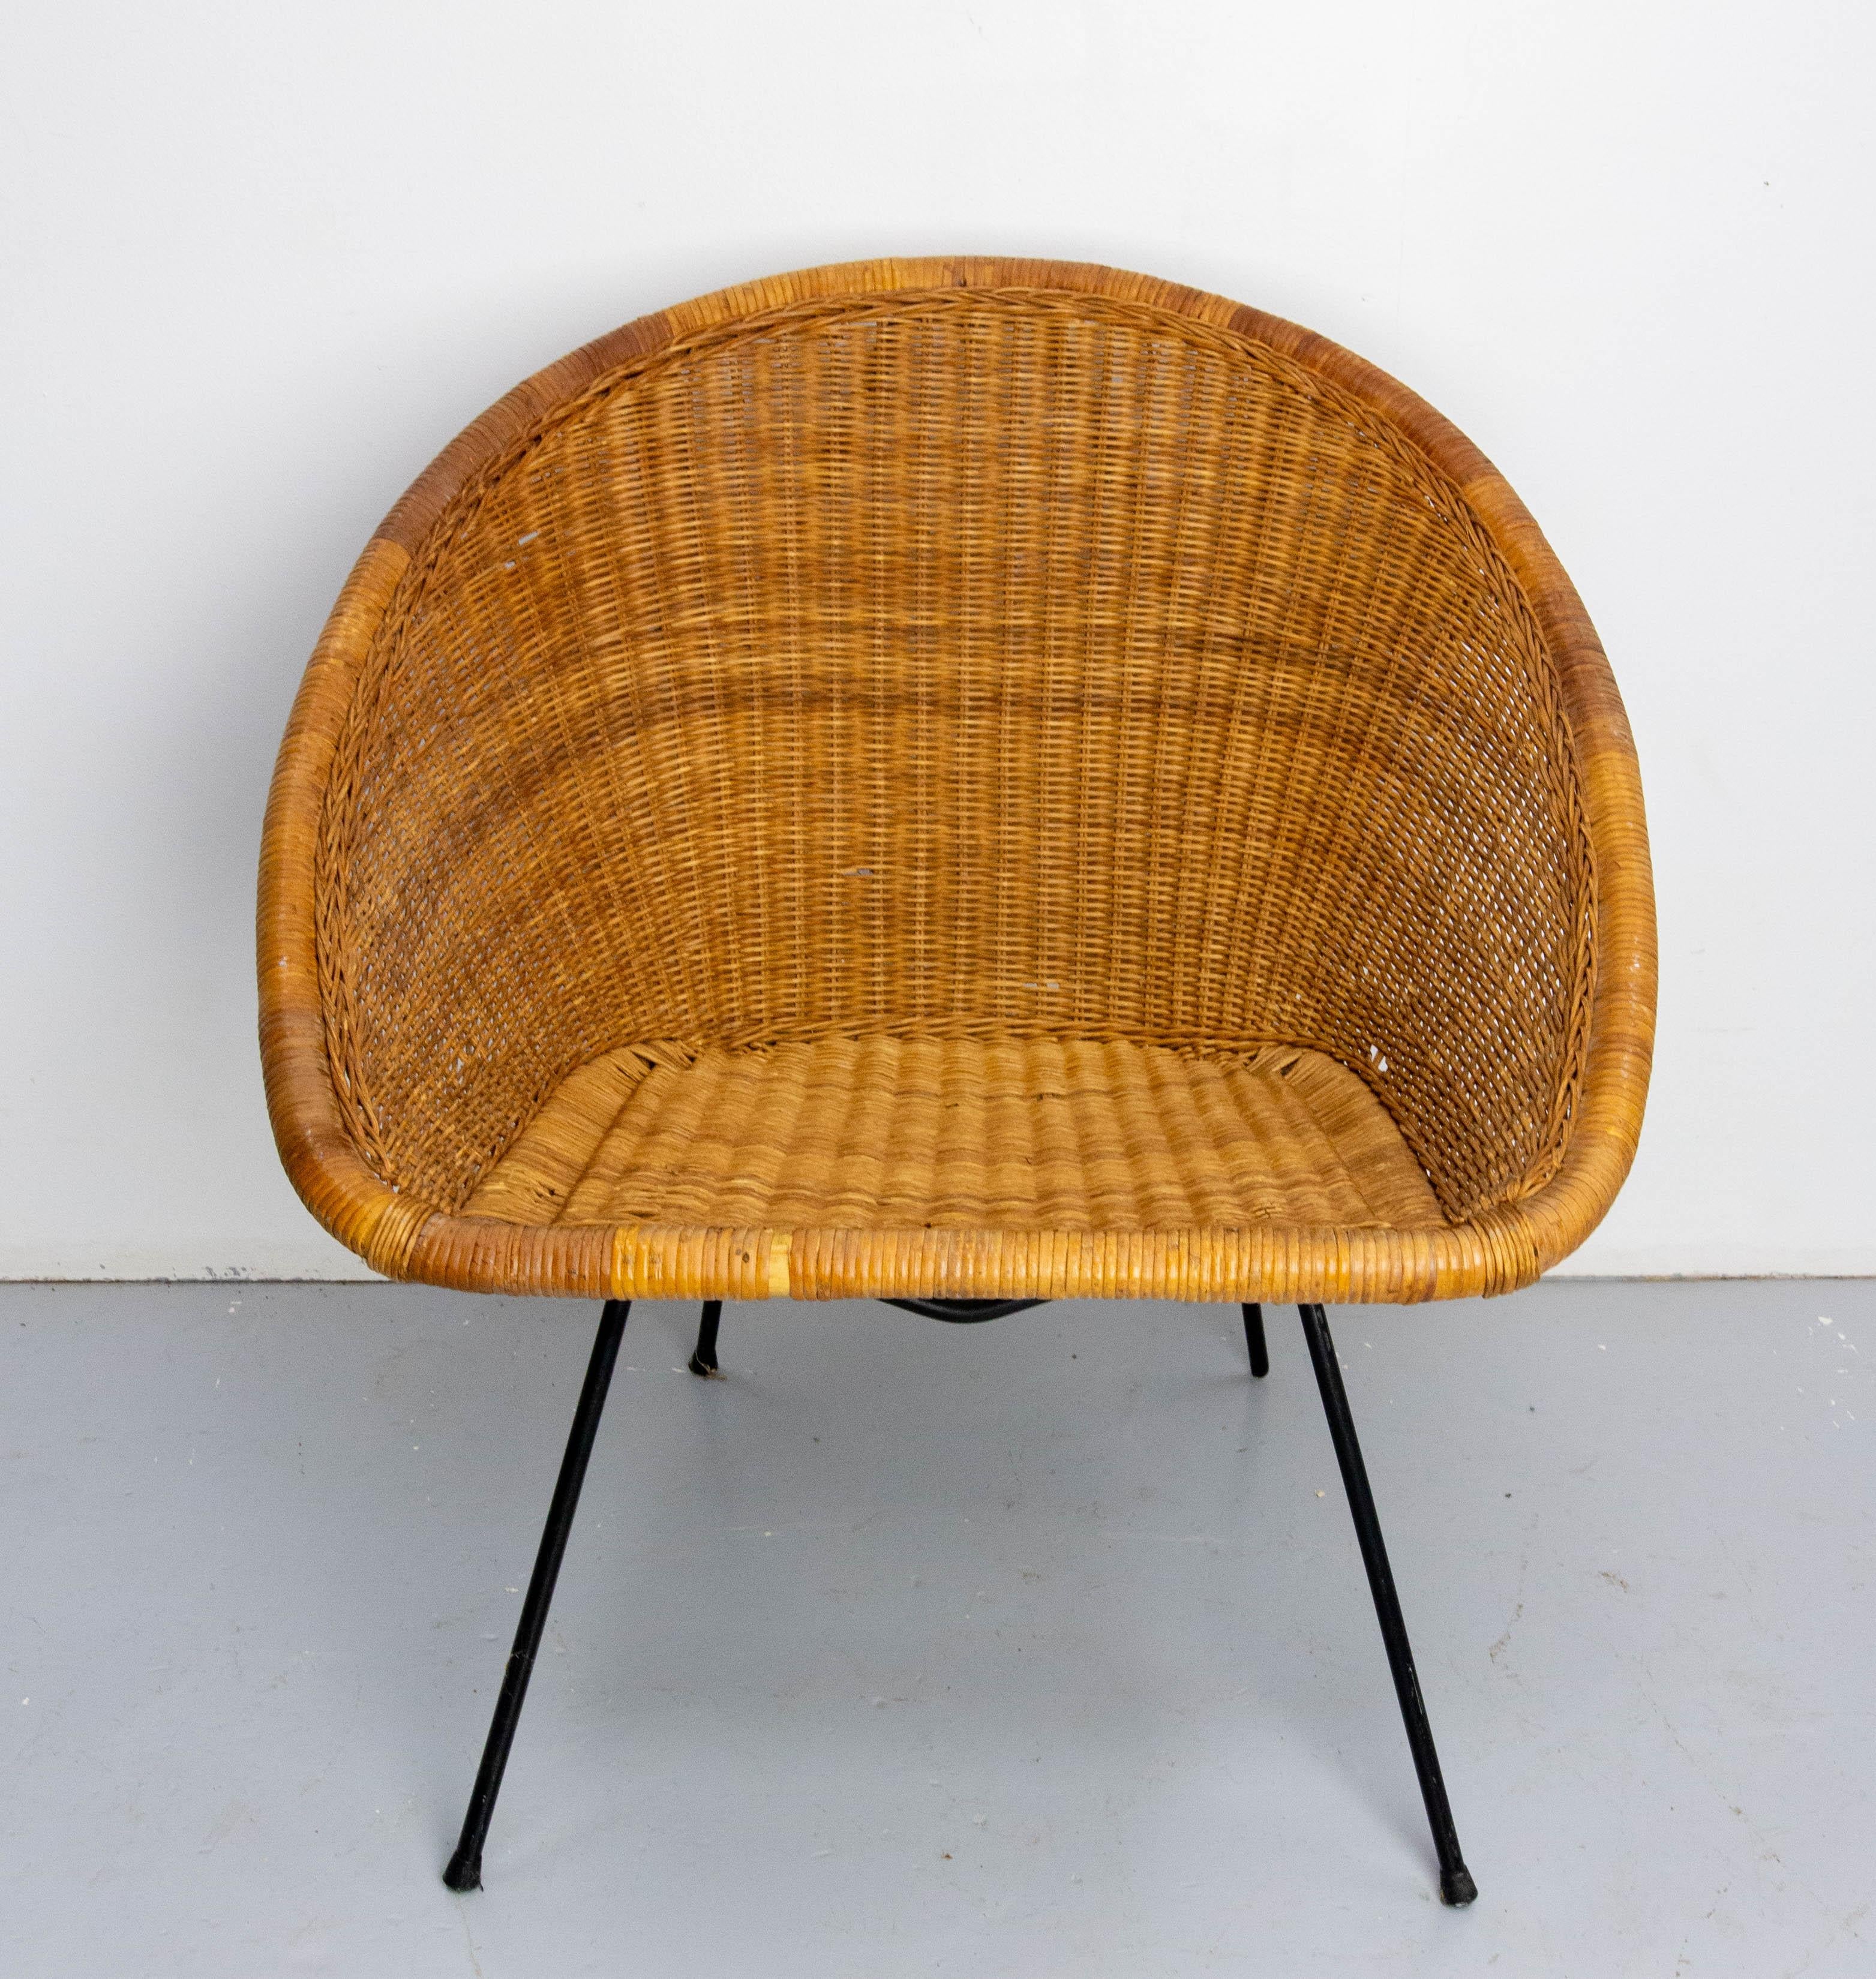 French chair made in wicker in the 20th mid-century on a black painted base.
Good condition with few gaps

Shipping:
69 / 70 / 72 cm 5.4 kg.
    